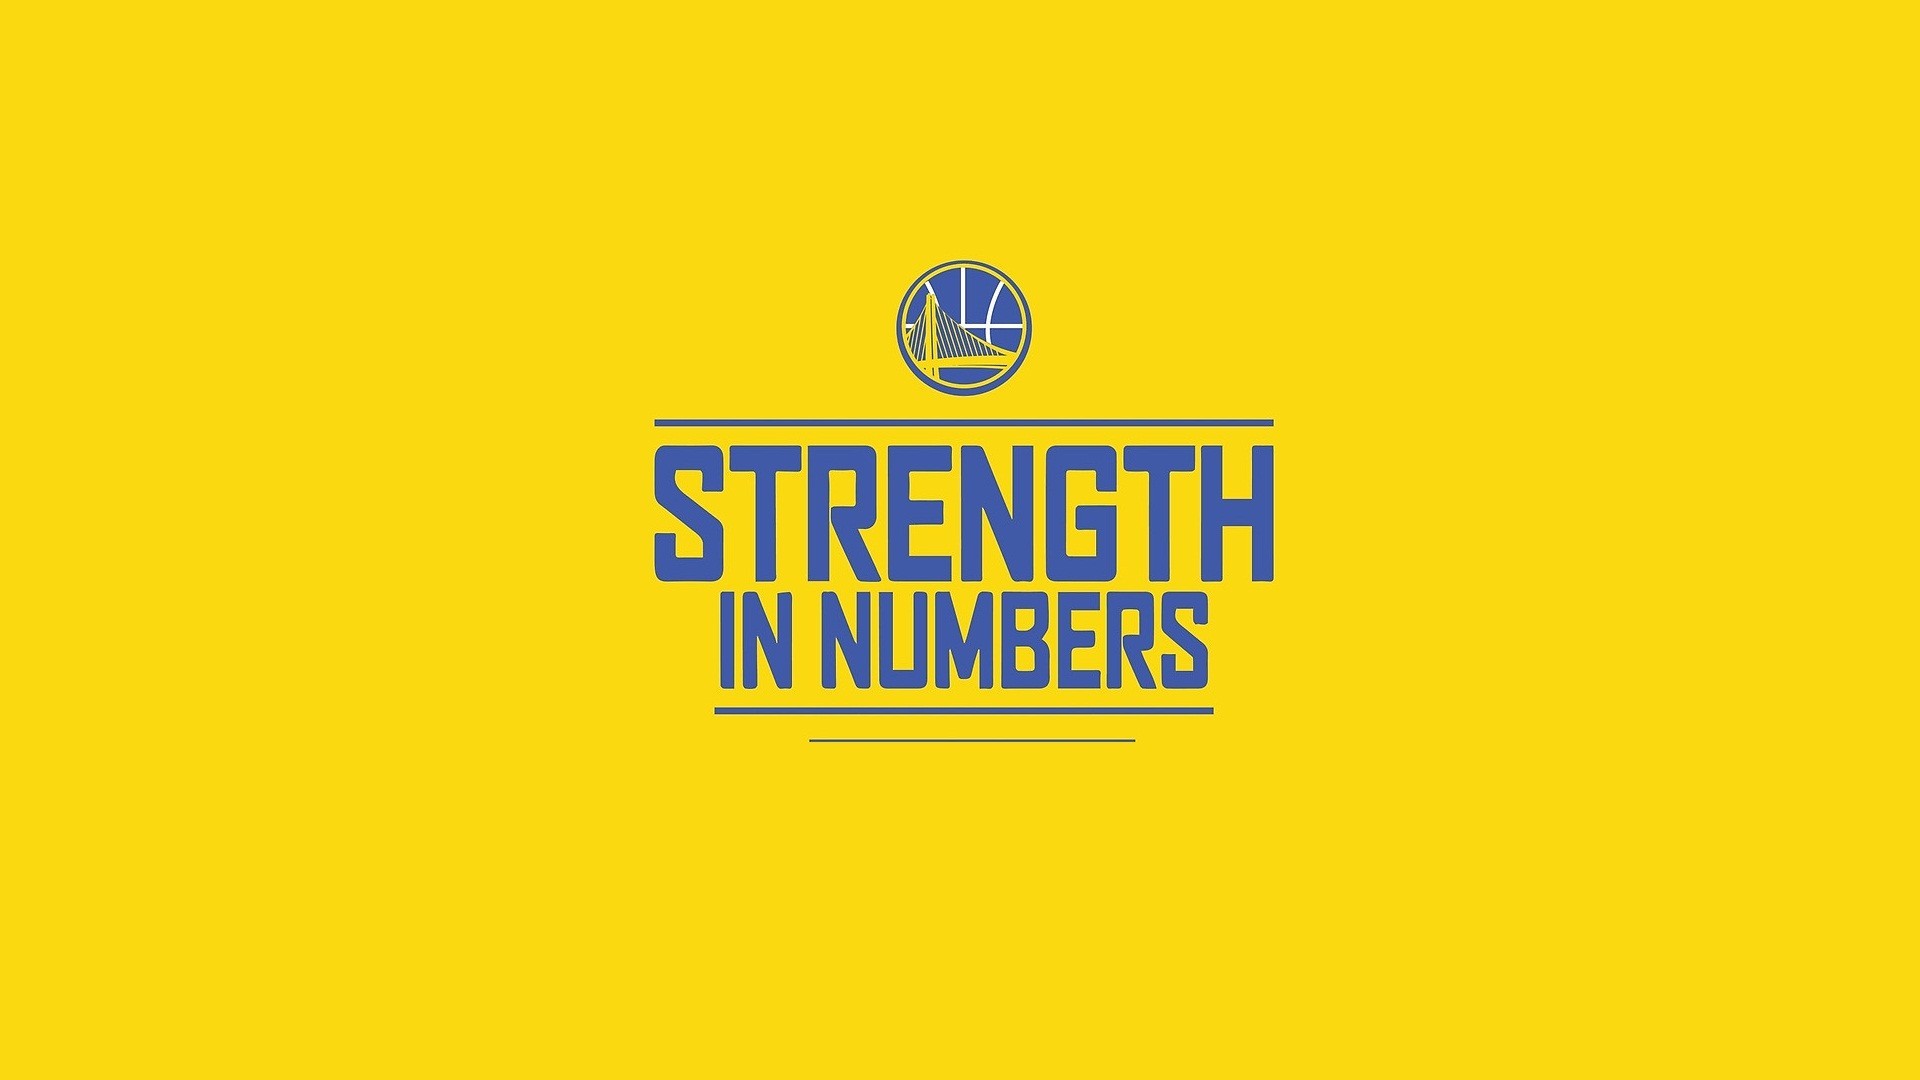 1920x1080 Golden State Warriors Logo For PC Wallpaper with image dimensions   pixel. You can make